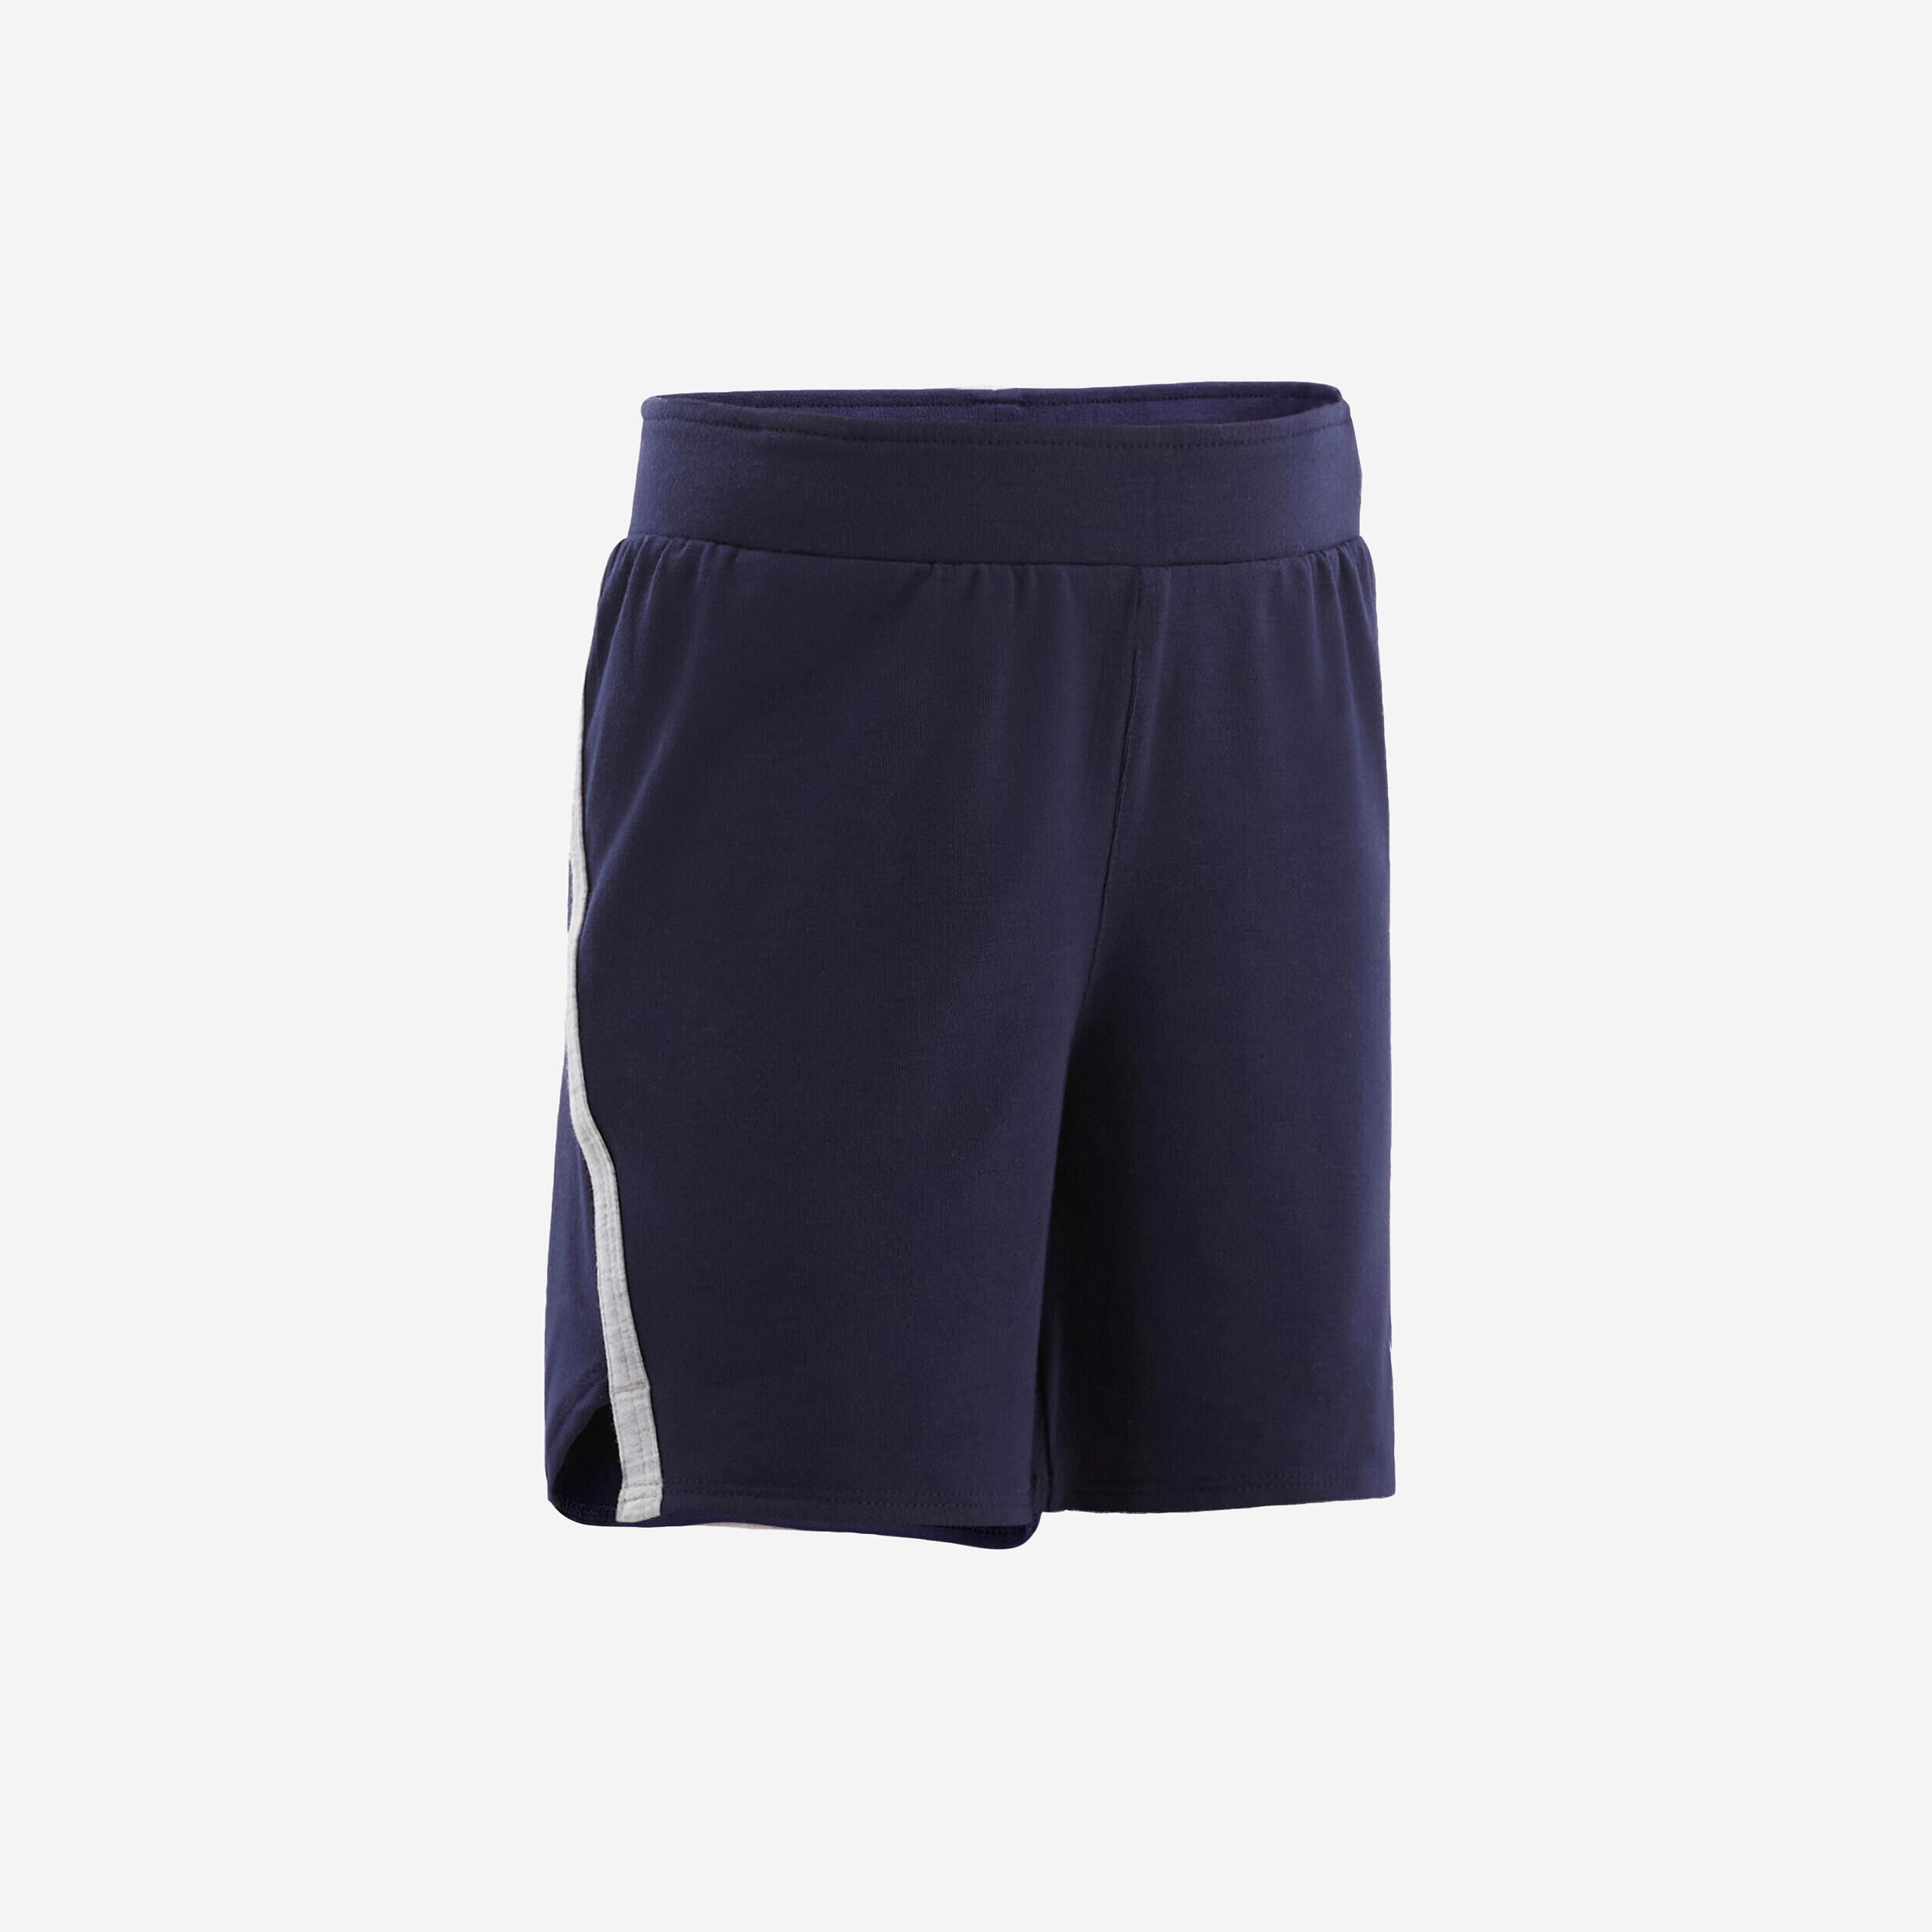 DOMYOS Baby Breathable and Adjustable Shorts